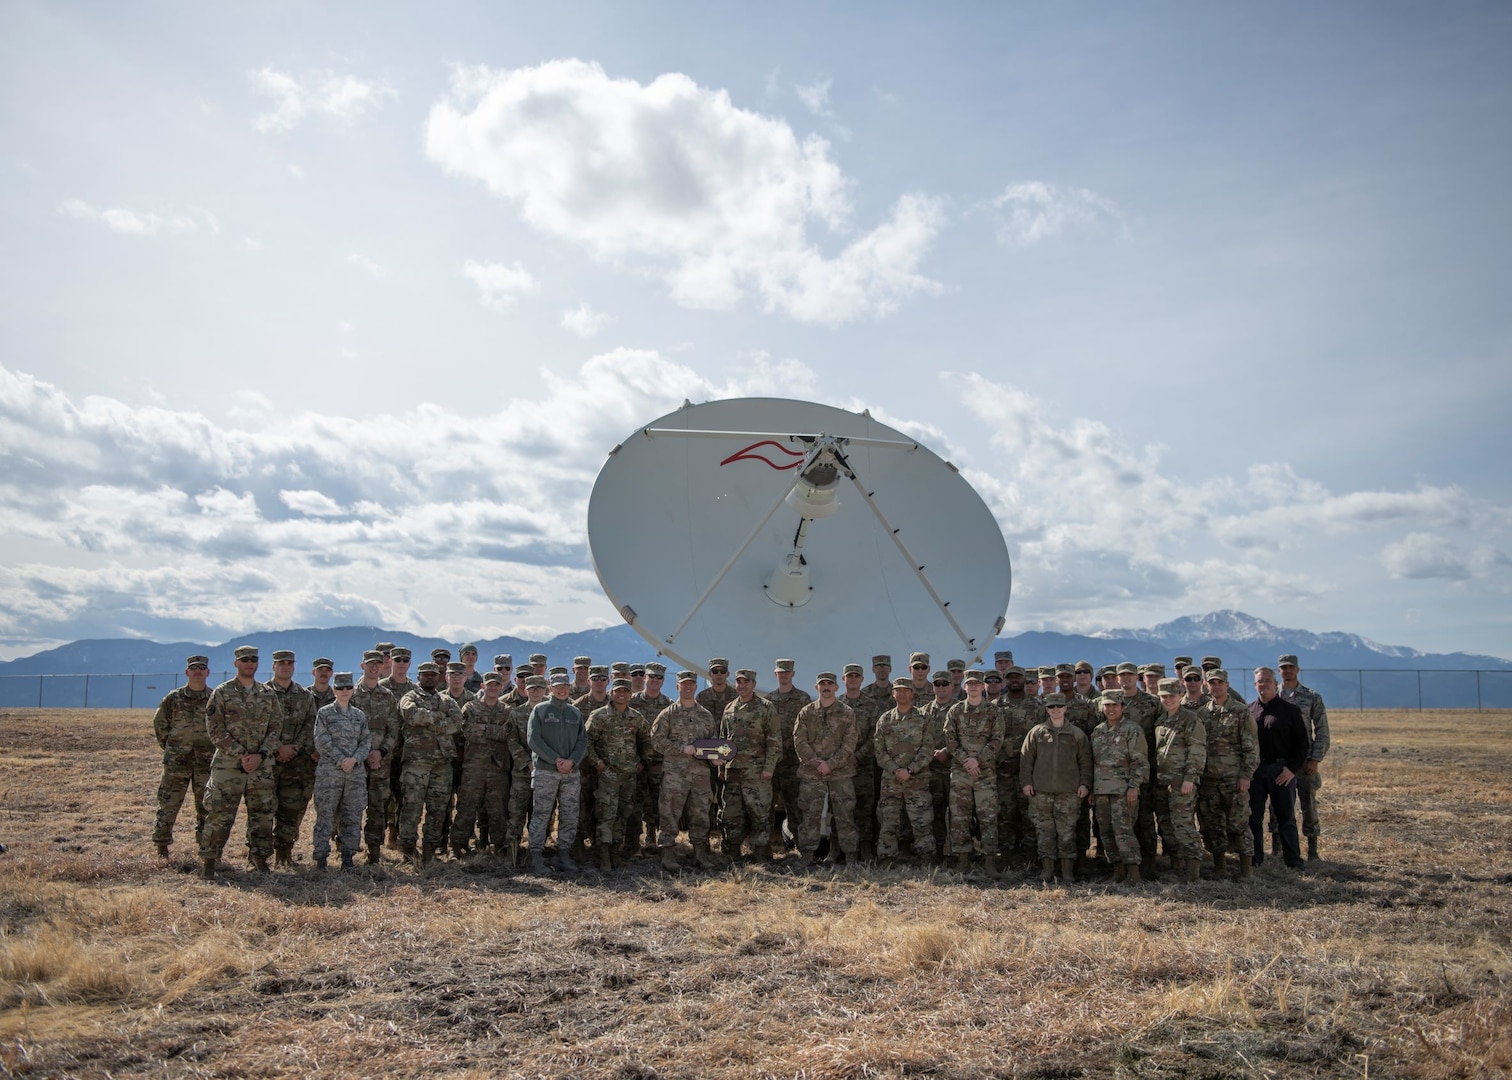 Airmen from the 4th Space Control Squadron take a picture in front of the Counter Communications System Block 10.2 on March 12, 2020, on Peterson Air Force Base, Colo. The 4th SPCS received the B10.2 from the Space and Missile Systems Center on Los Angeles Air Force Base, Calif., making it the first offensive weapon system assigned to the United States Space Force.